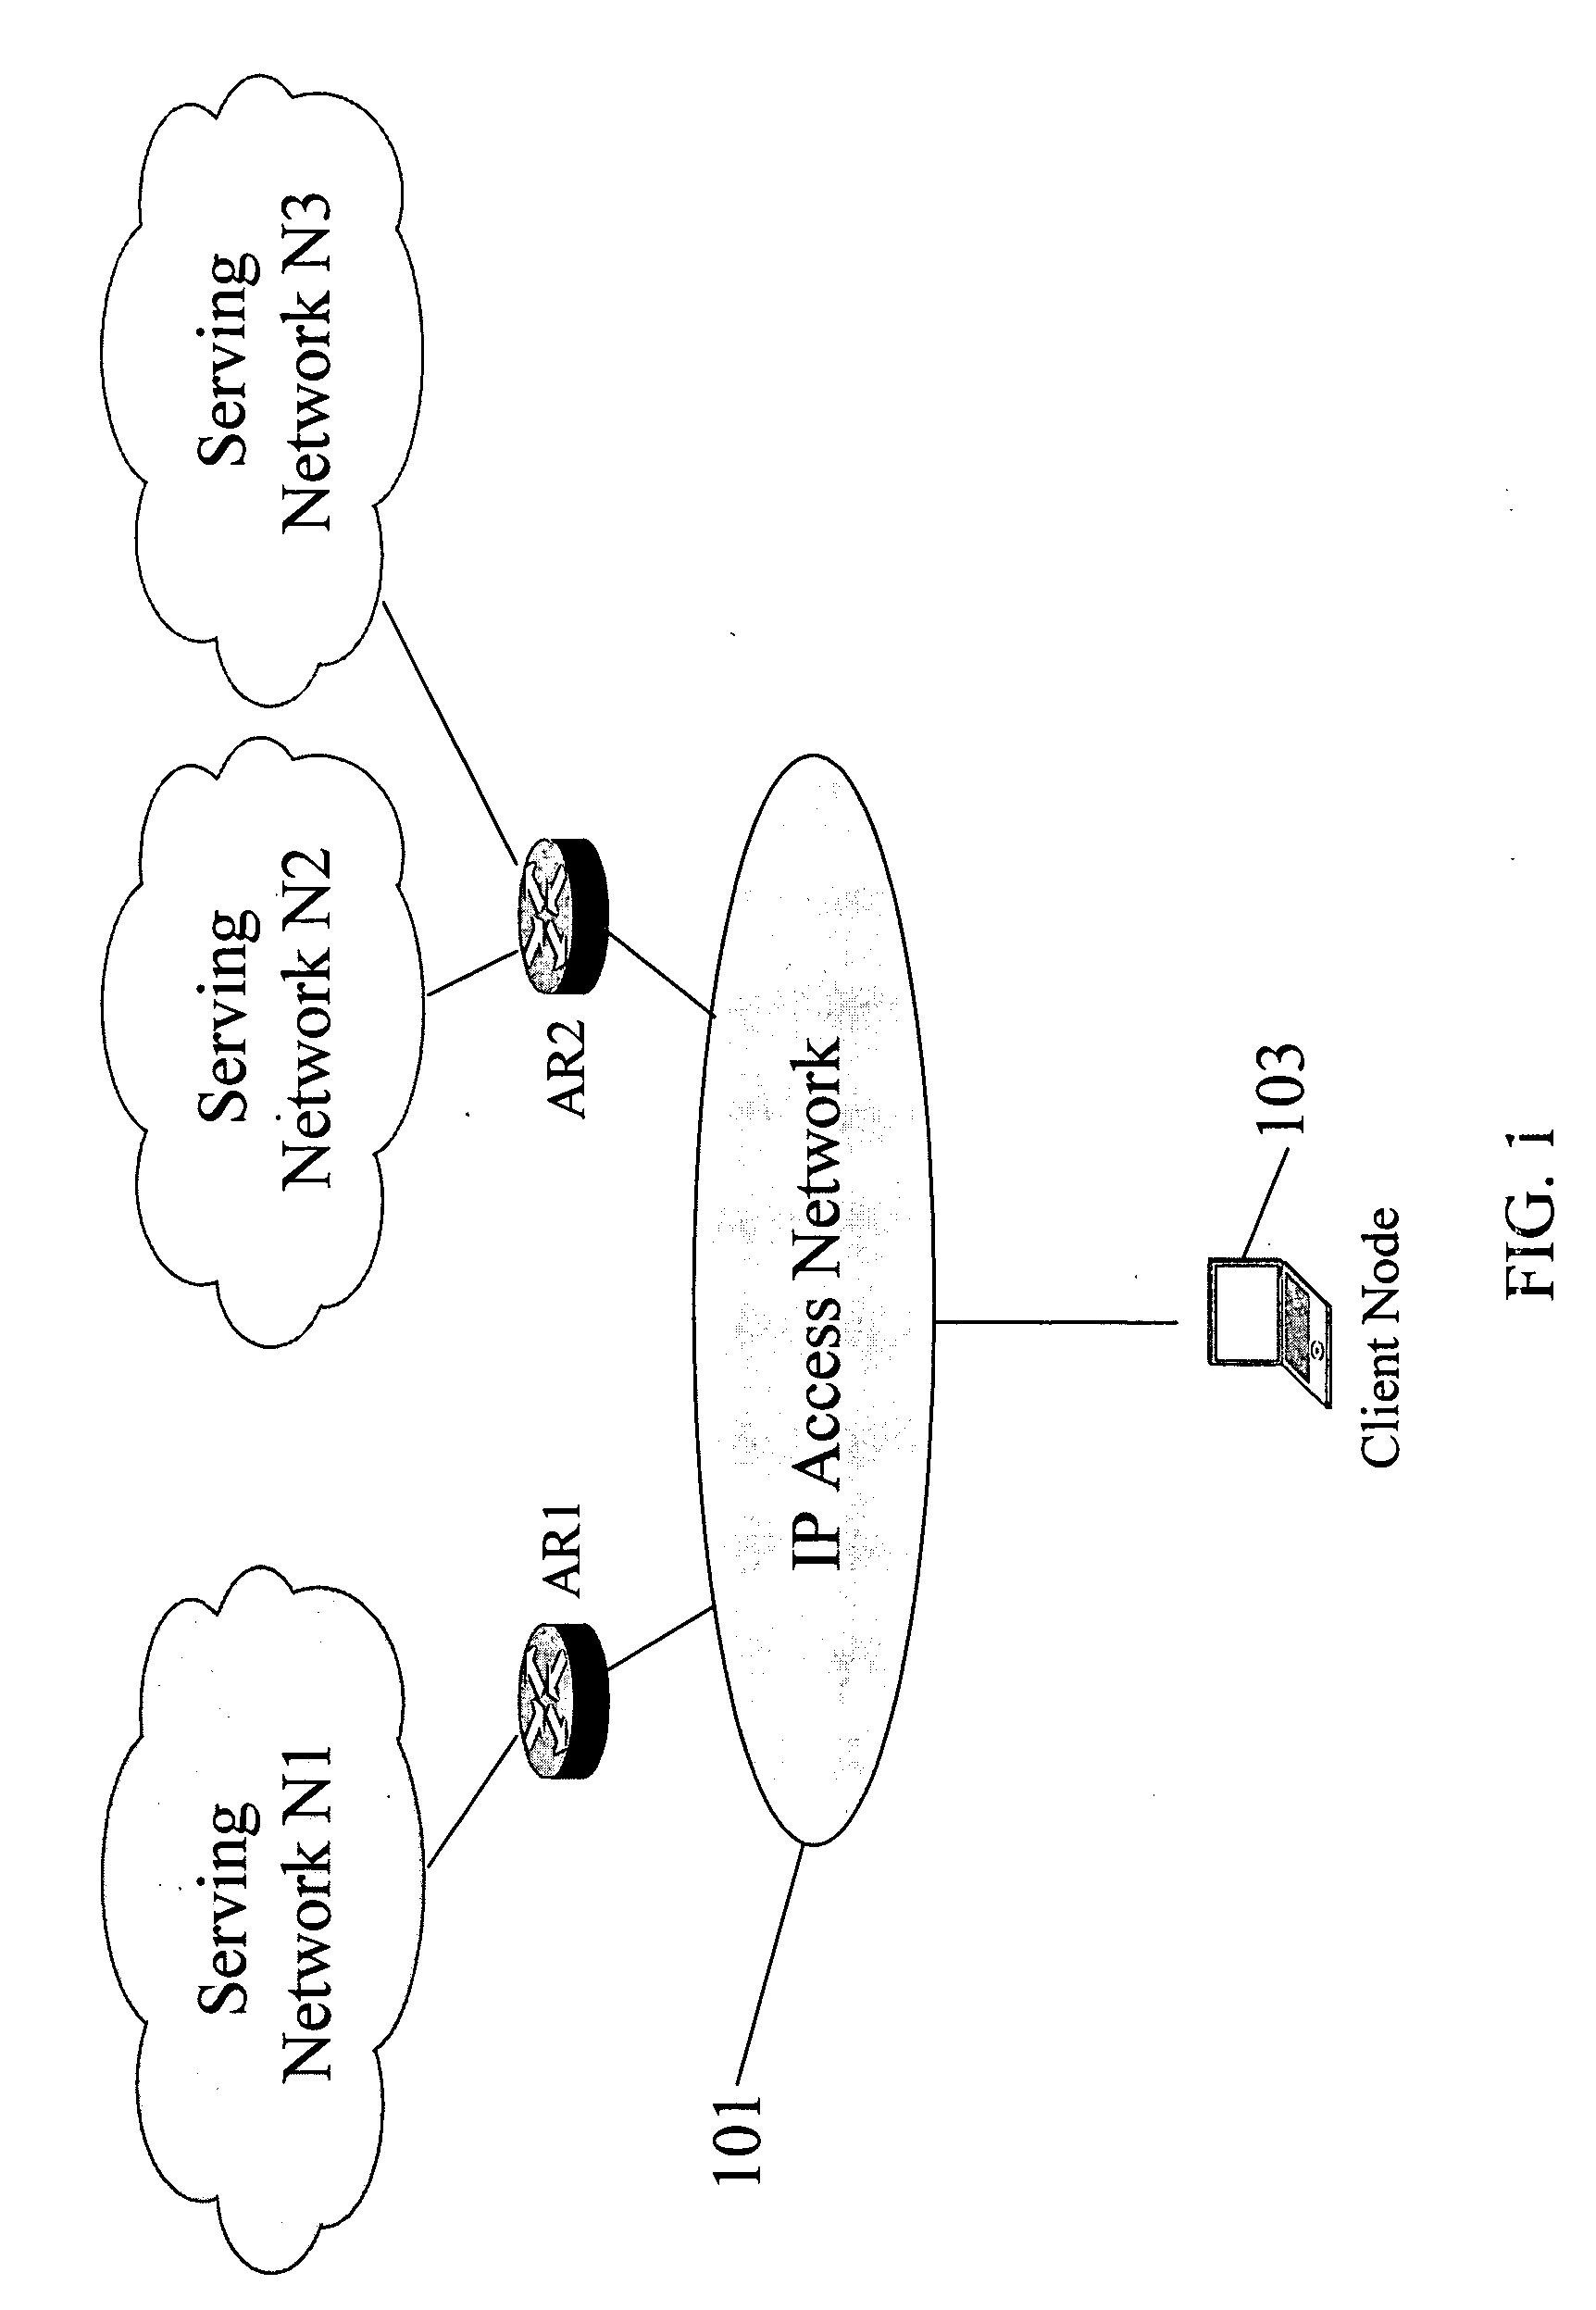 Serving network selection and multihoming using IP access network